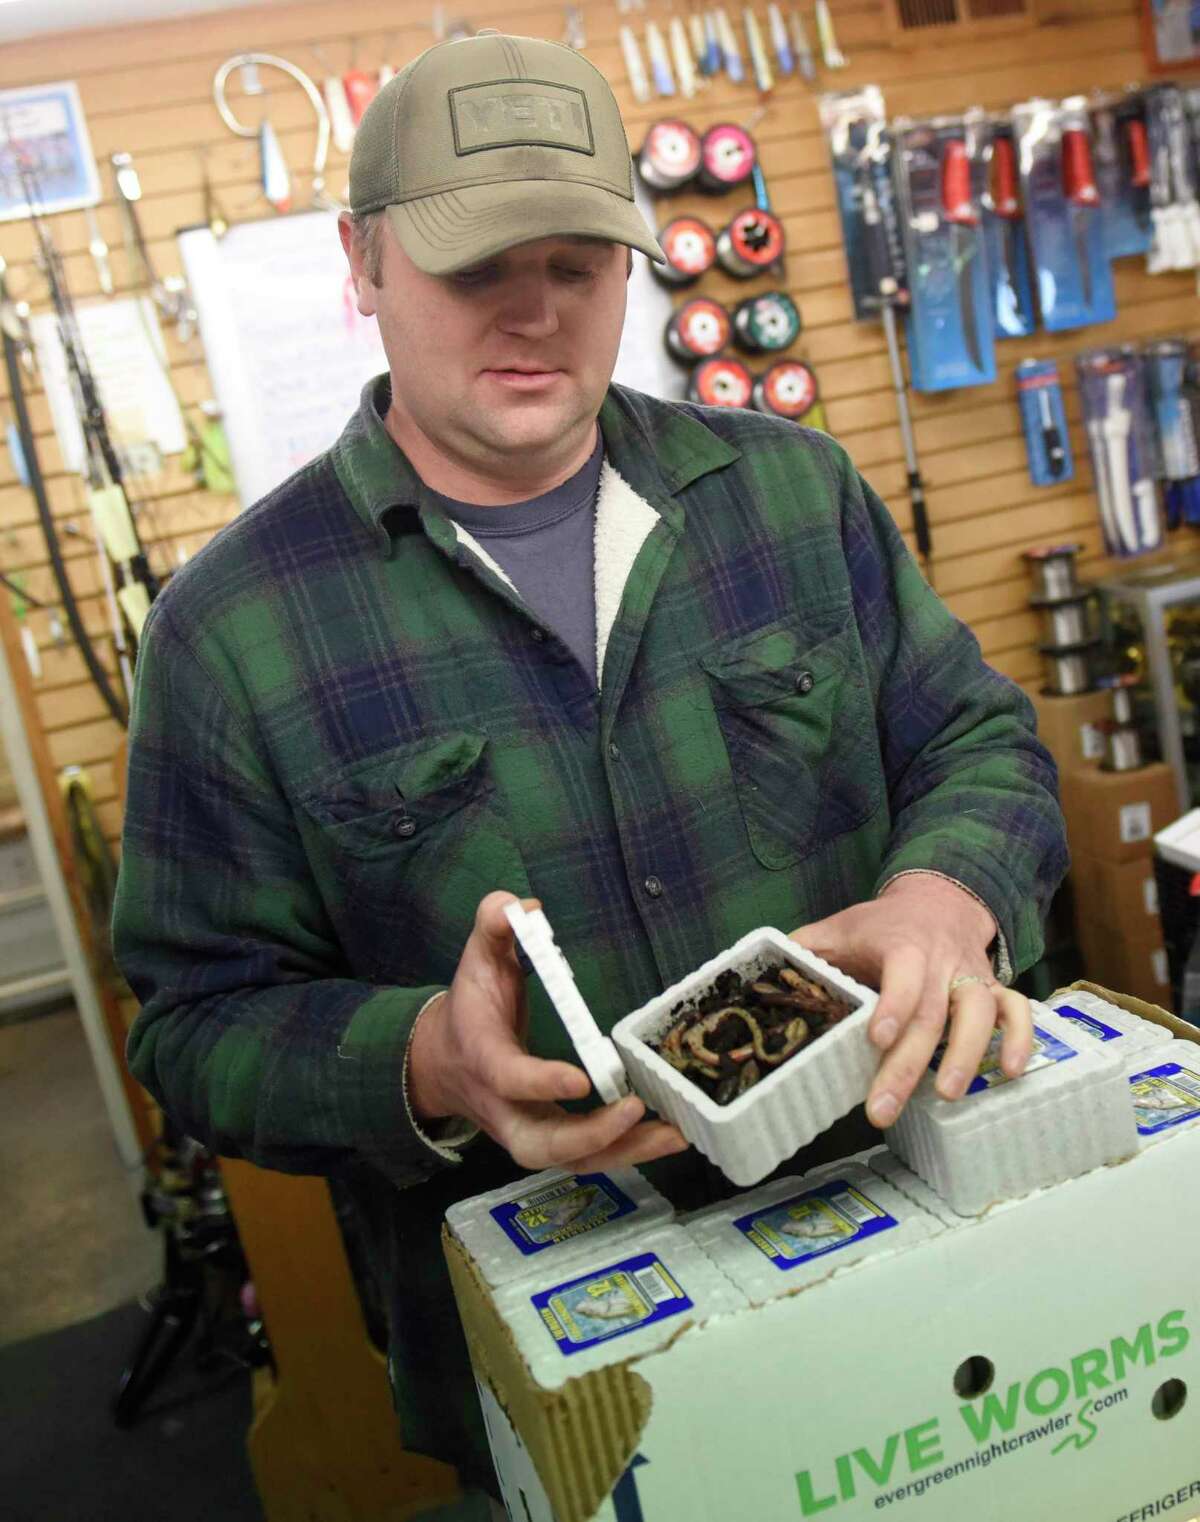 Store owner William Ingraham shows nightcrawler fishing bait available at The Sportsman’s Den in the Cos Cob section of Greenwich, Conn. Wednesday, March 25, 2020. Connecticut Gov. Ned Lamont declared Wednesday the start of the fishing season as a measure to prevent the spread of the coronavirus by eliminating large crowds that typically accompany opening day. "On a nice day, what better place is there to socially distance yourself than out on the water?" said Ingraham.